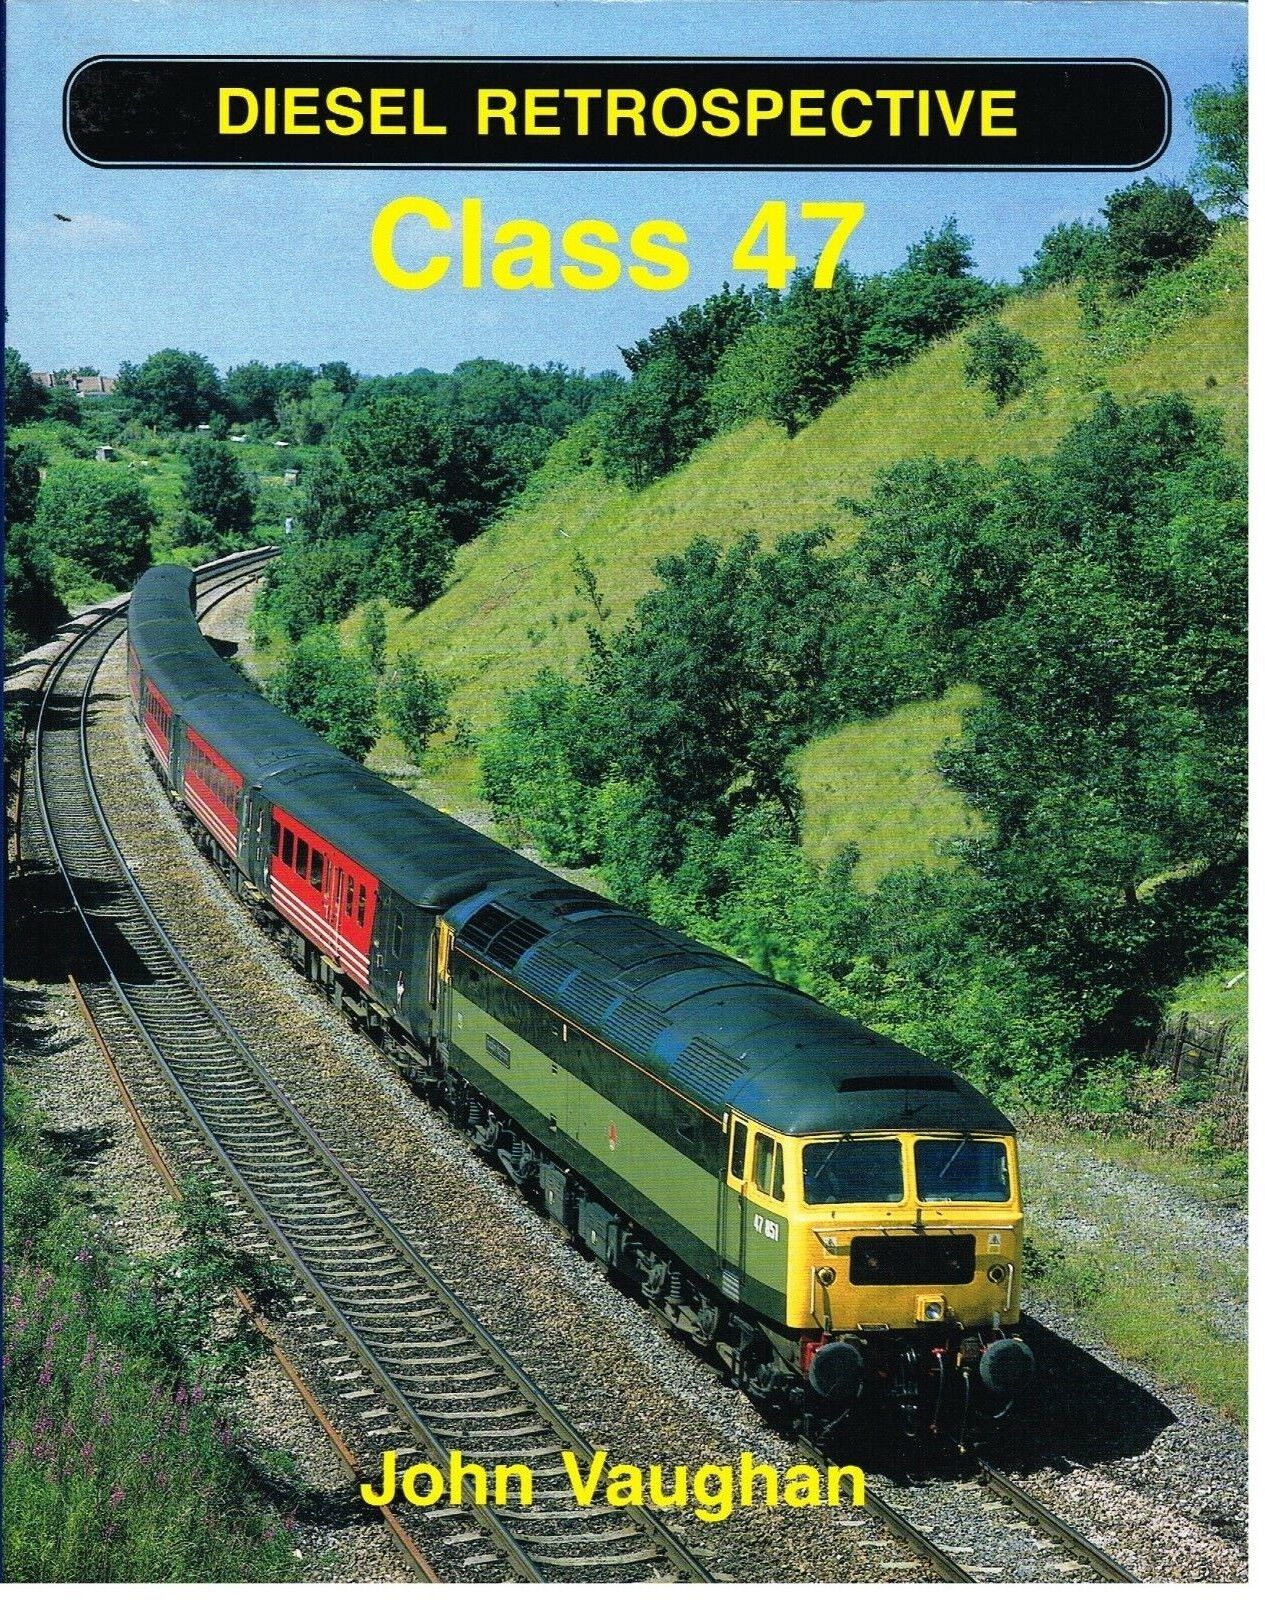 BR BRUSH CL. 47 DIESEL LOCO's IN THE 80s & 90s PICTORIAL IN-SERVICE HISTORY BOOK